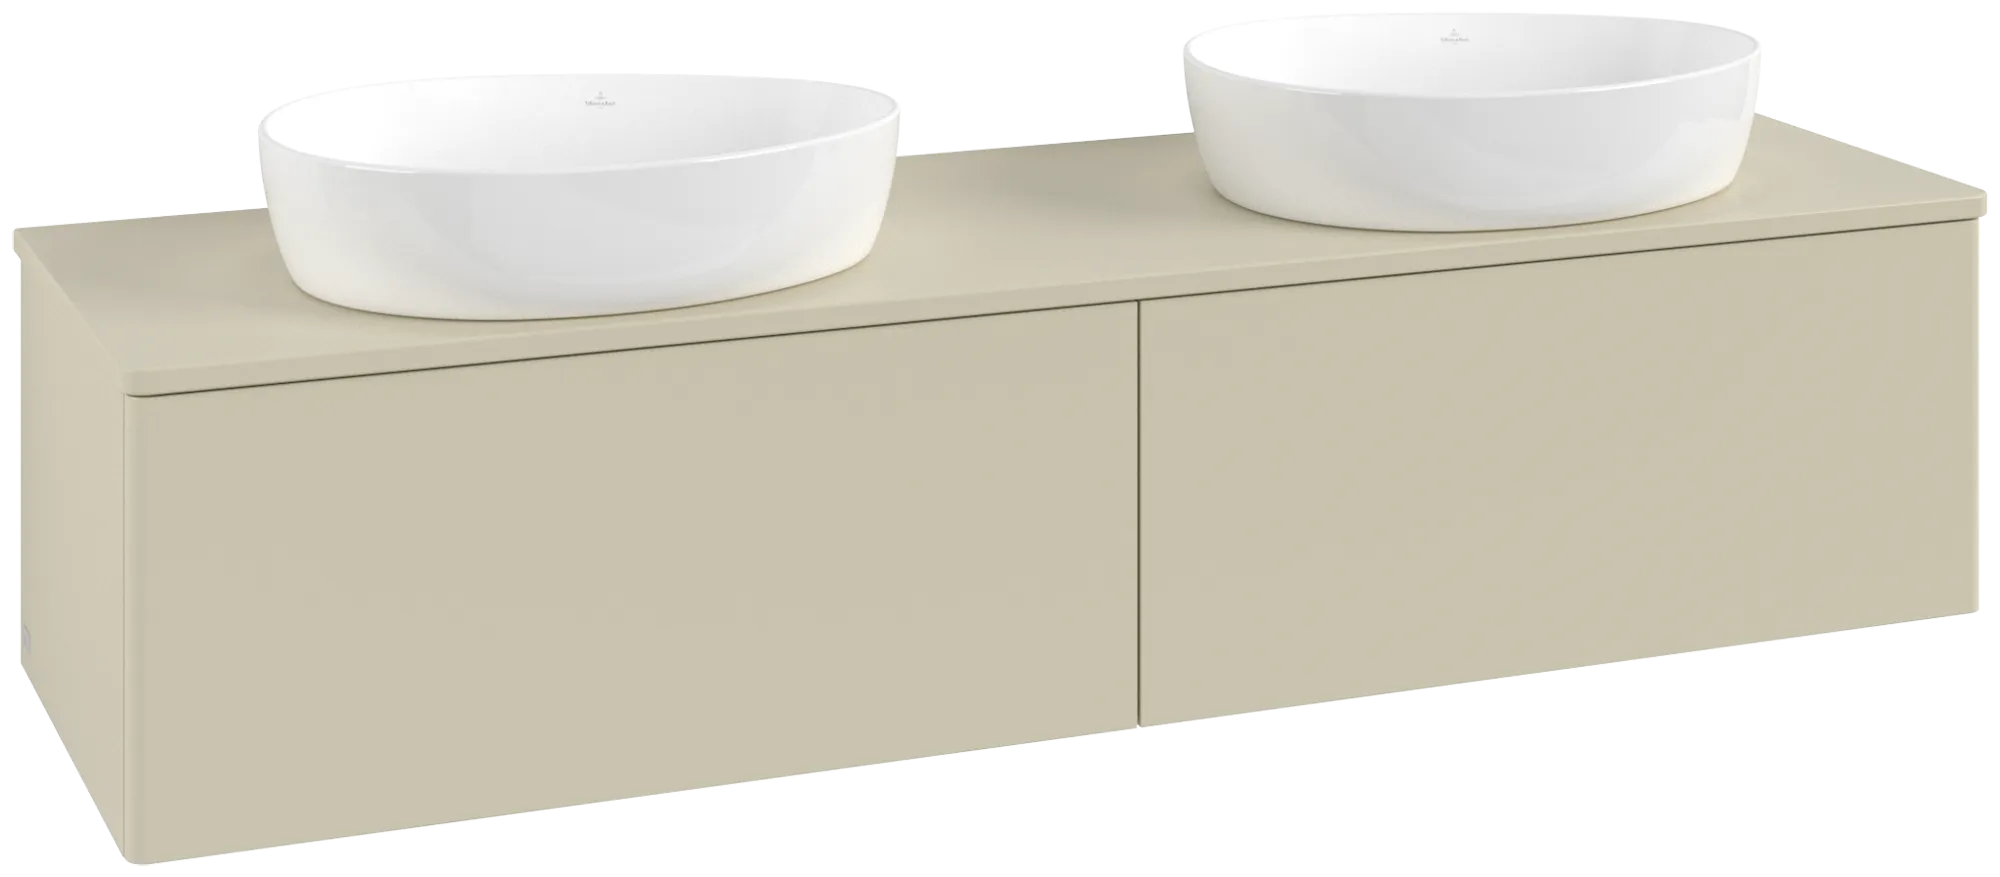 Picture of VILLEROY BOCH Antao Vanity unit, 2 pull-out compartments, 1600 x 360 x 500 mm, Front without structure, Silk Grey Matt Lacquer / Silk Grey Matt Lacquer #K39050HJ